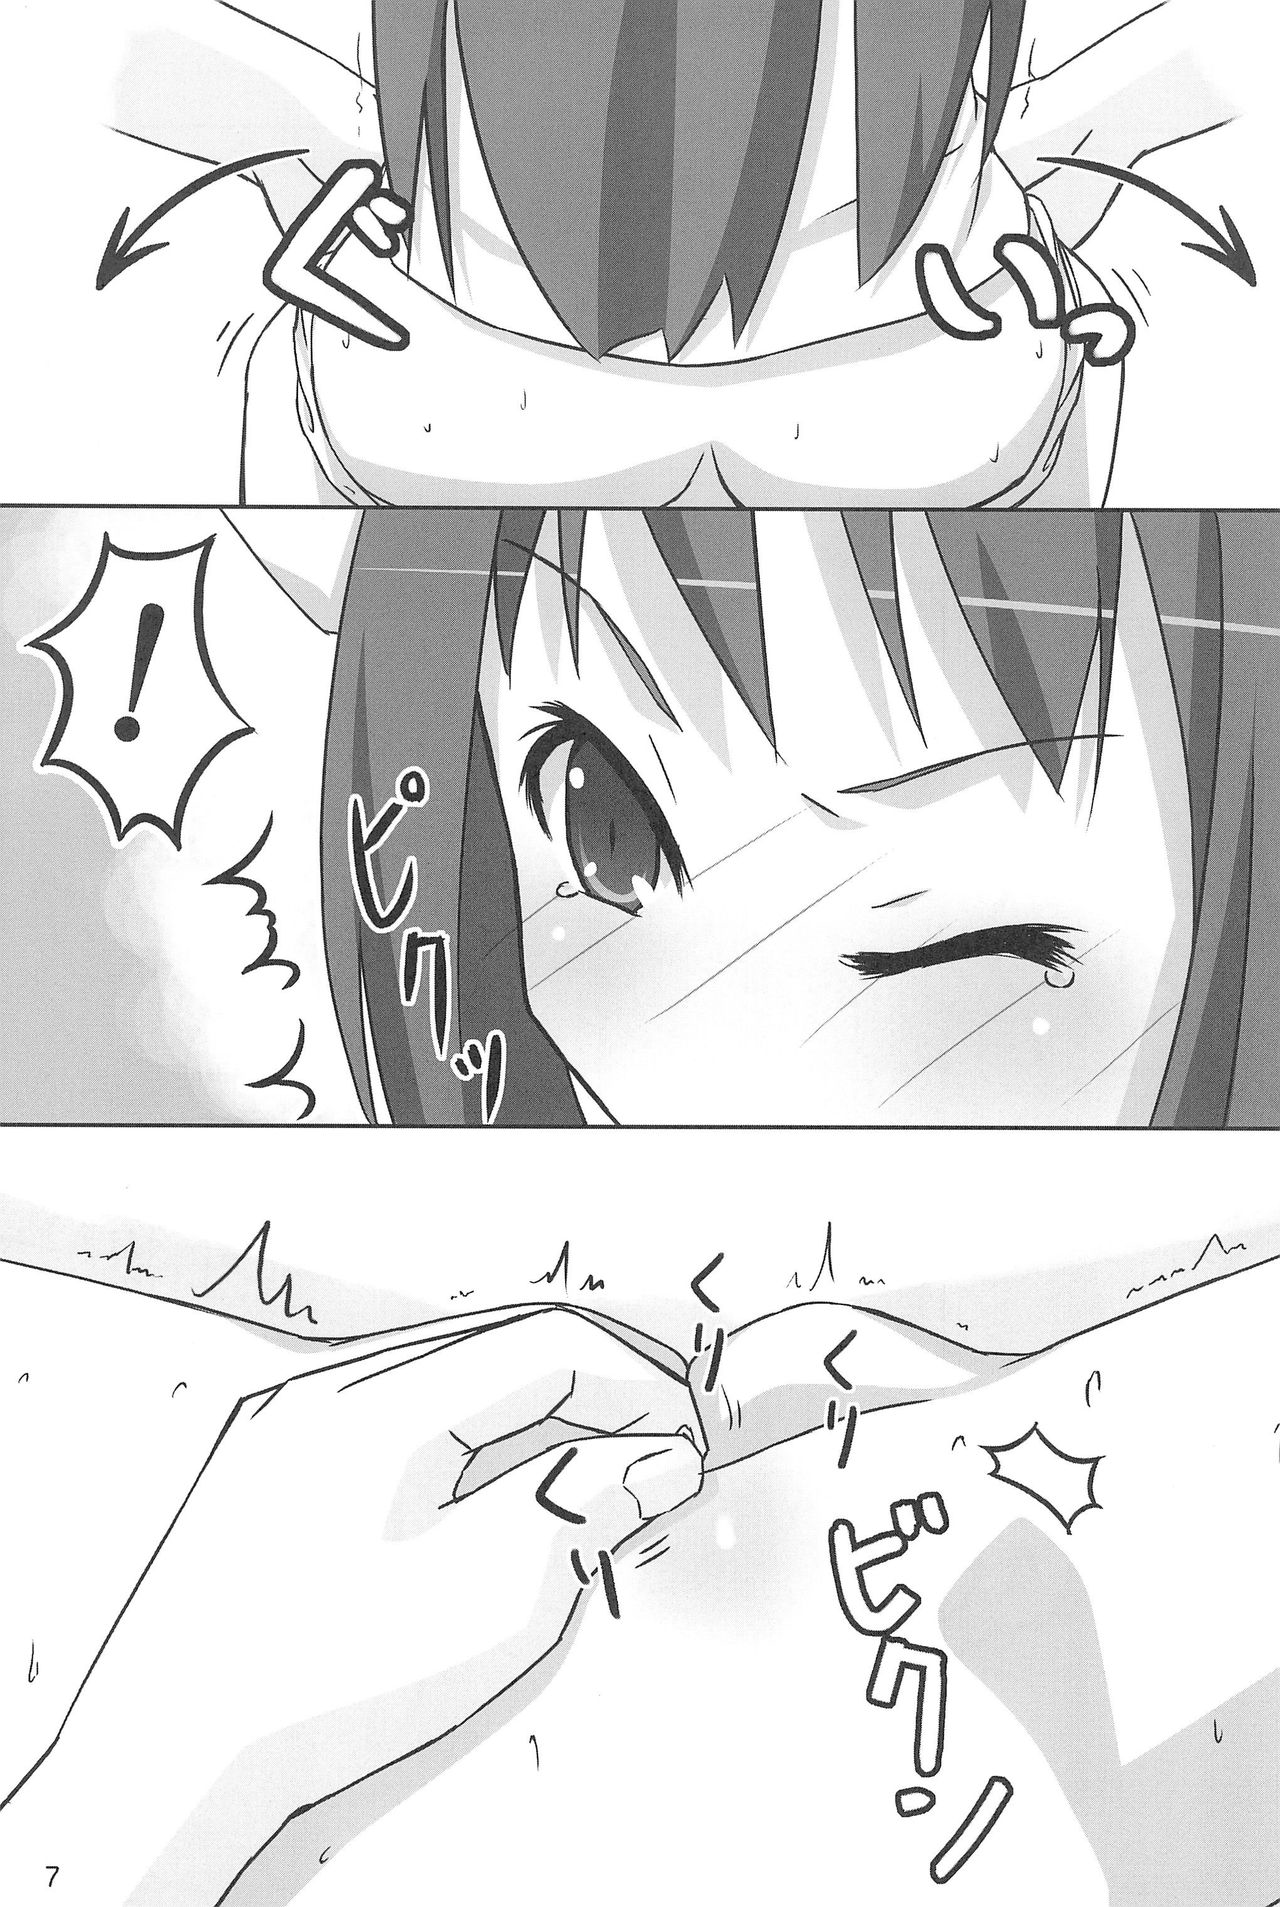 Tiny Angel Collection 3 hentai manga picture 7